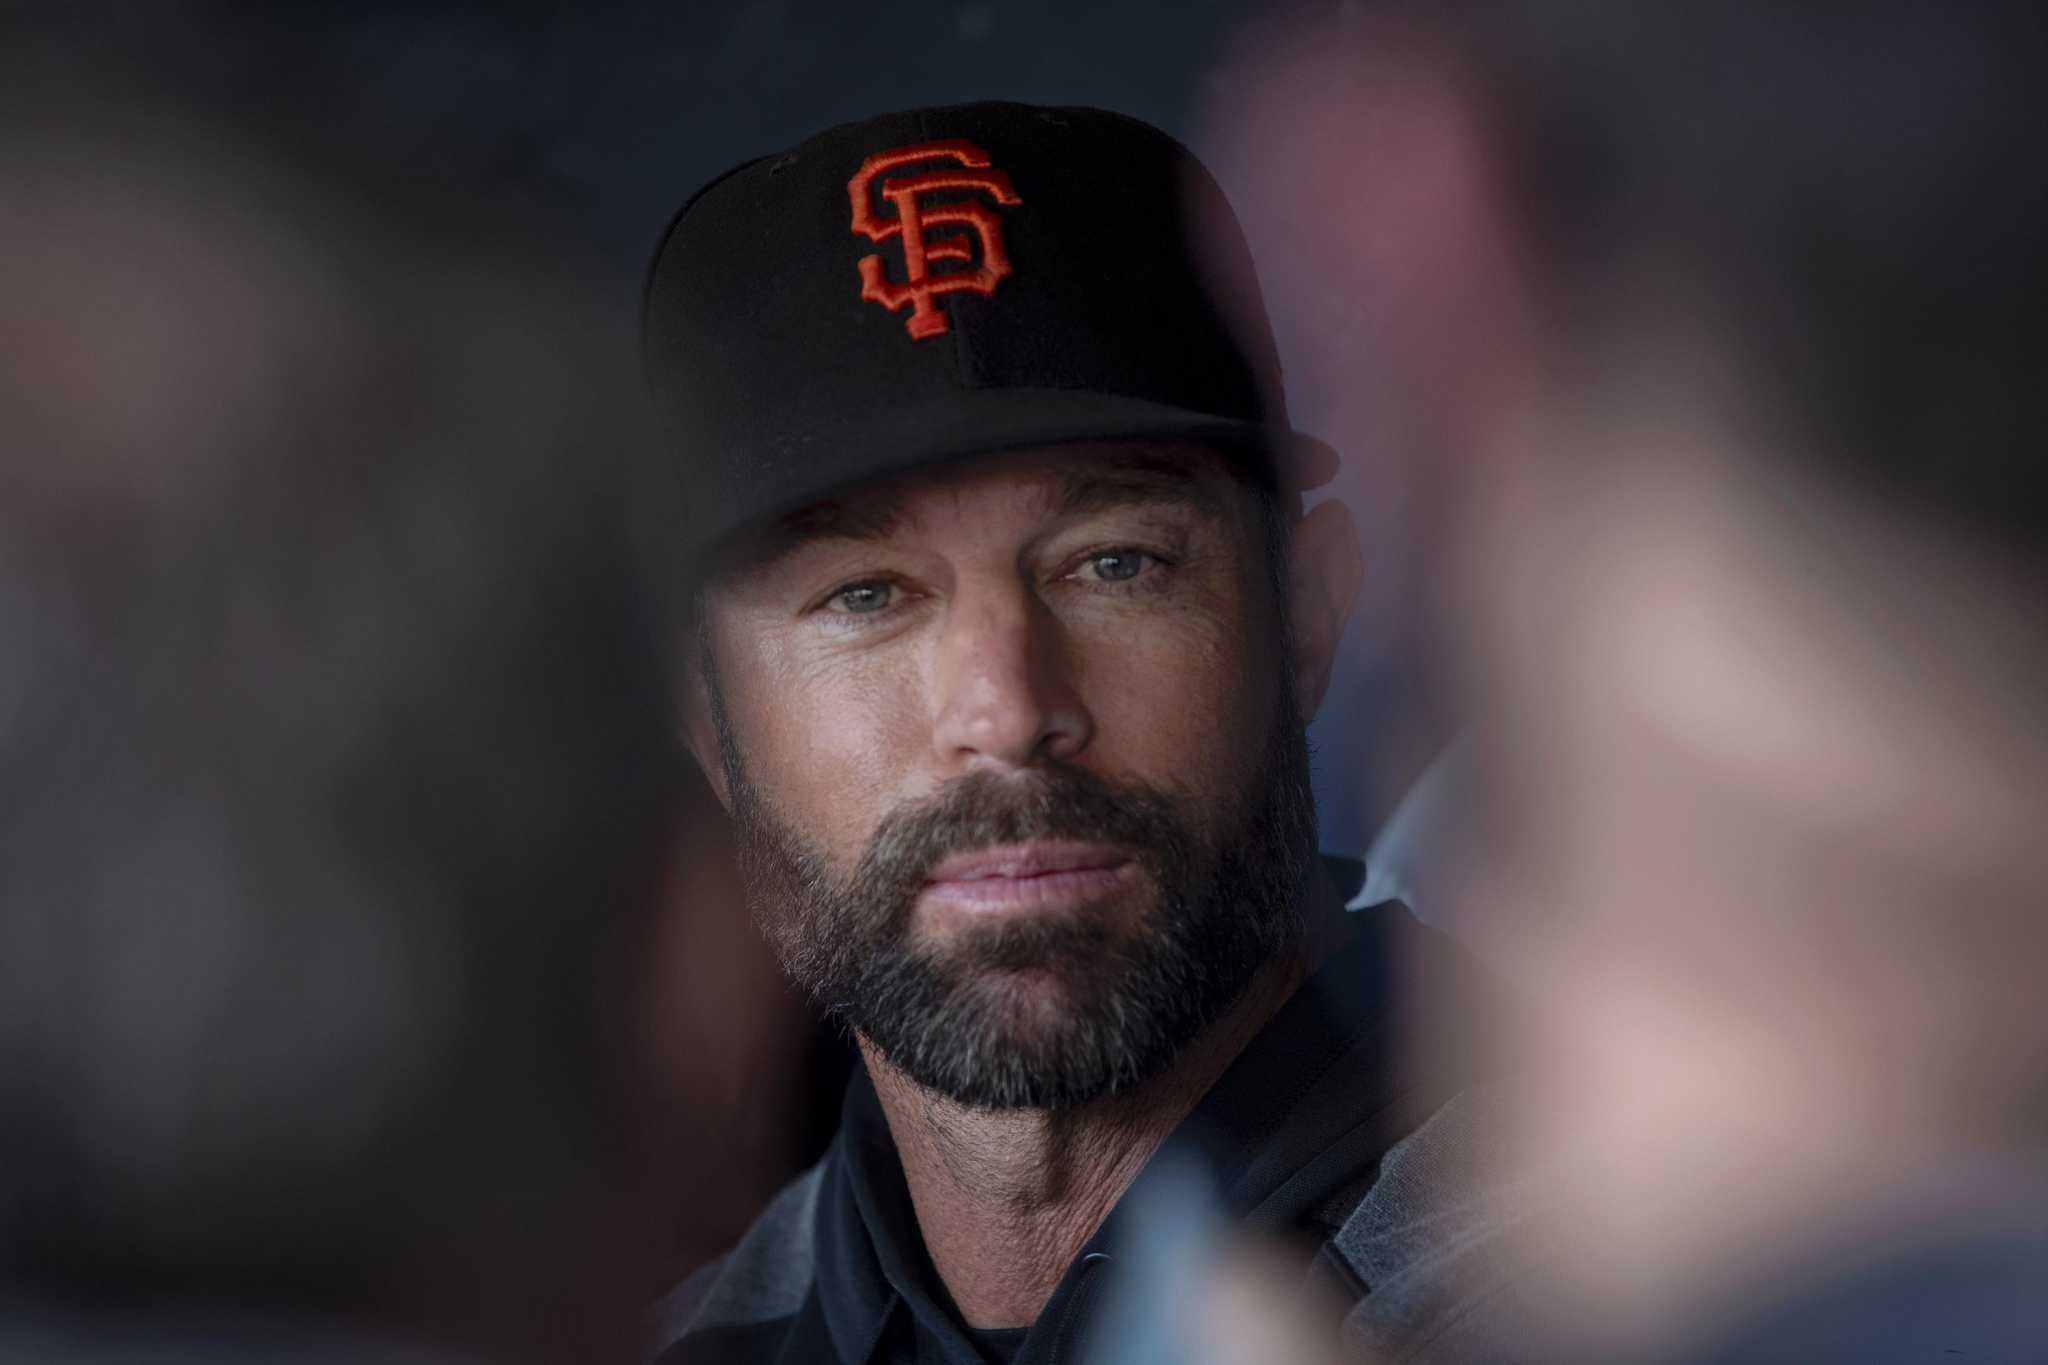 For Giants' manager Gabe Kapler, a 'somewhat emotional' Father's Day